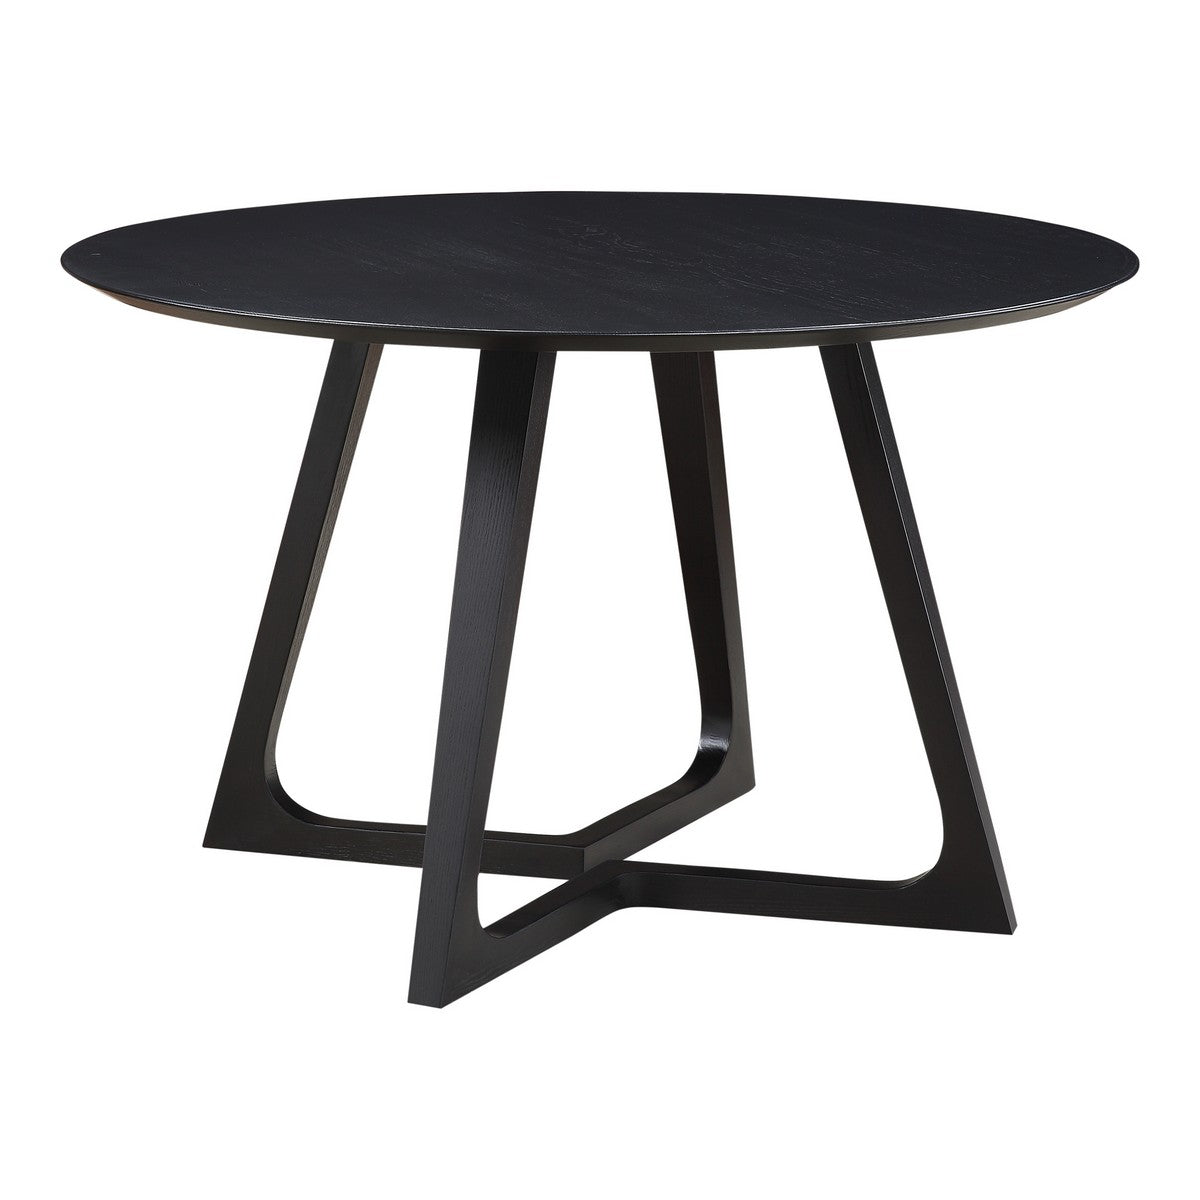 Moe's Home Collection Godenza Dining Table Round Black Ash - CB-1003-02